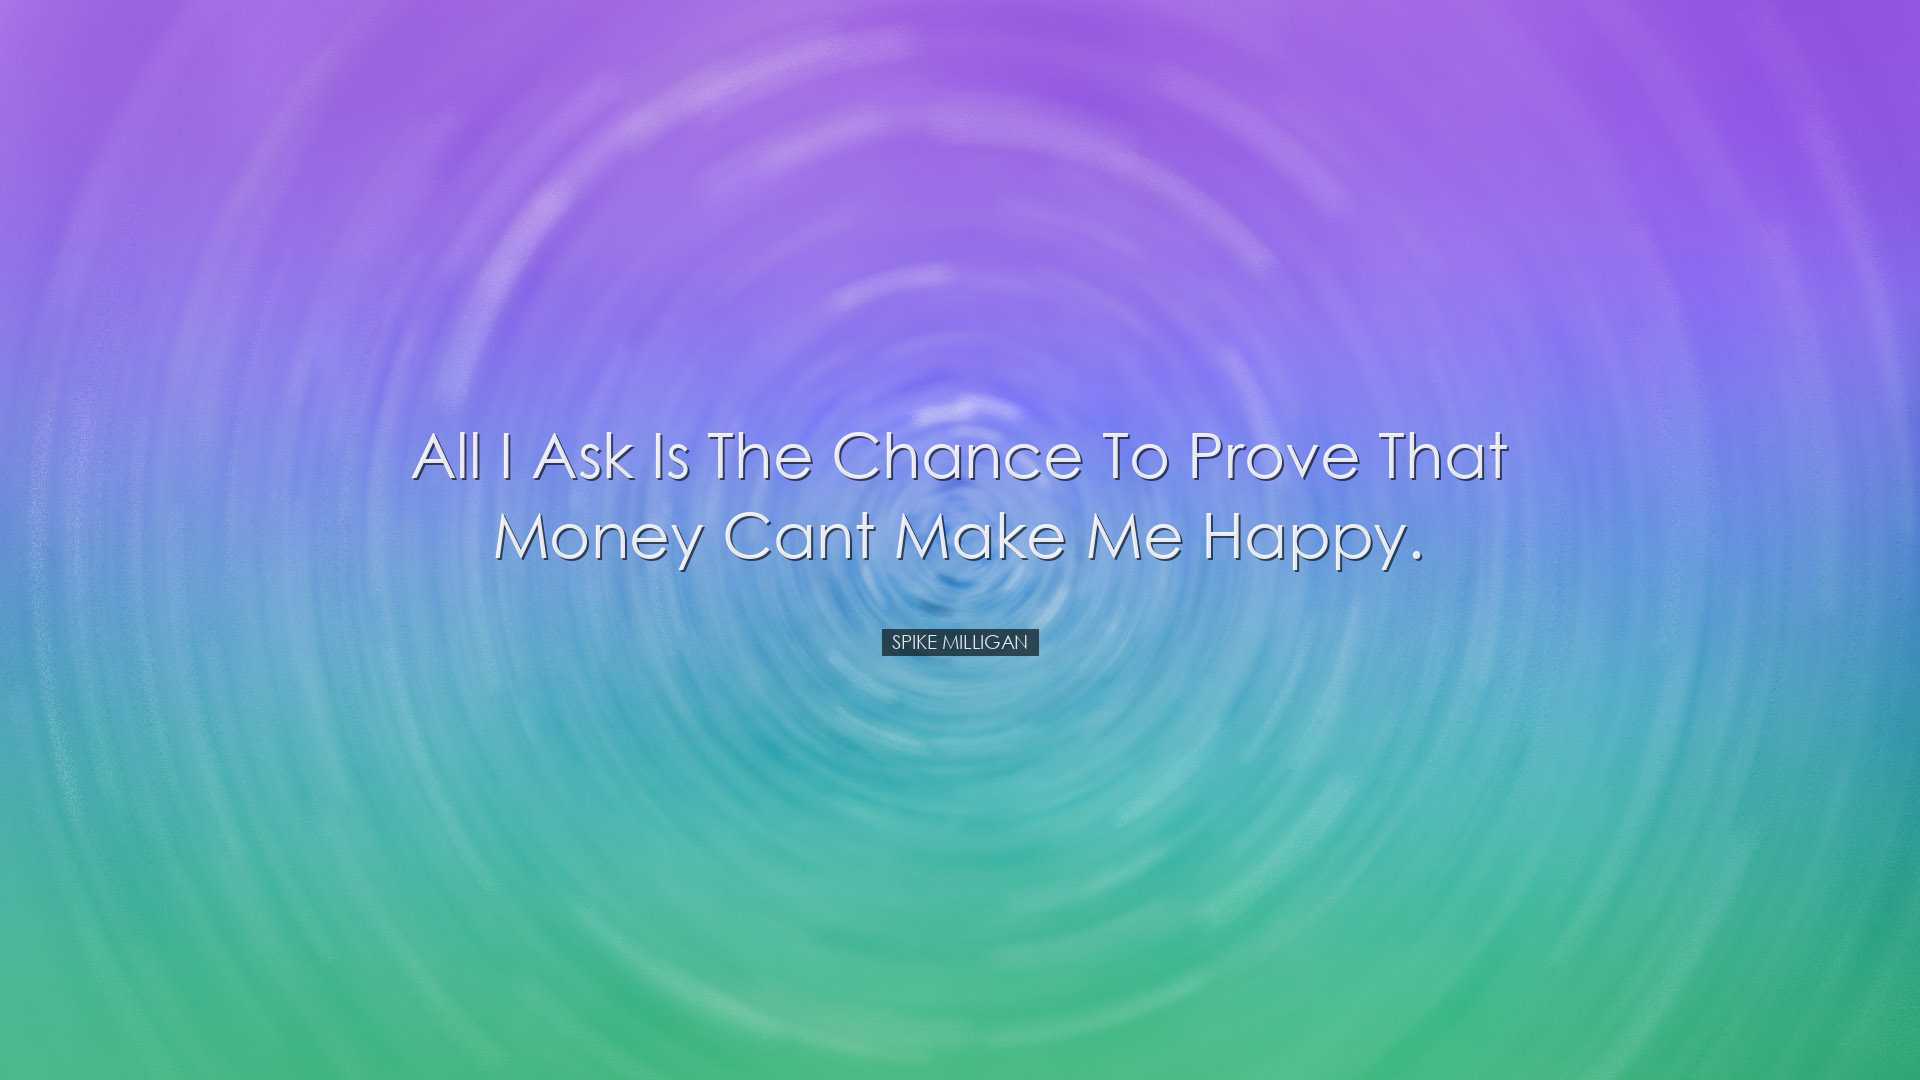 All I ask is the chance to prove that money cant make me happy. -